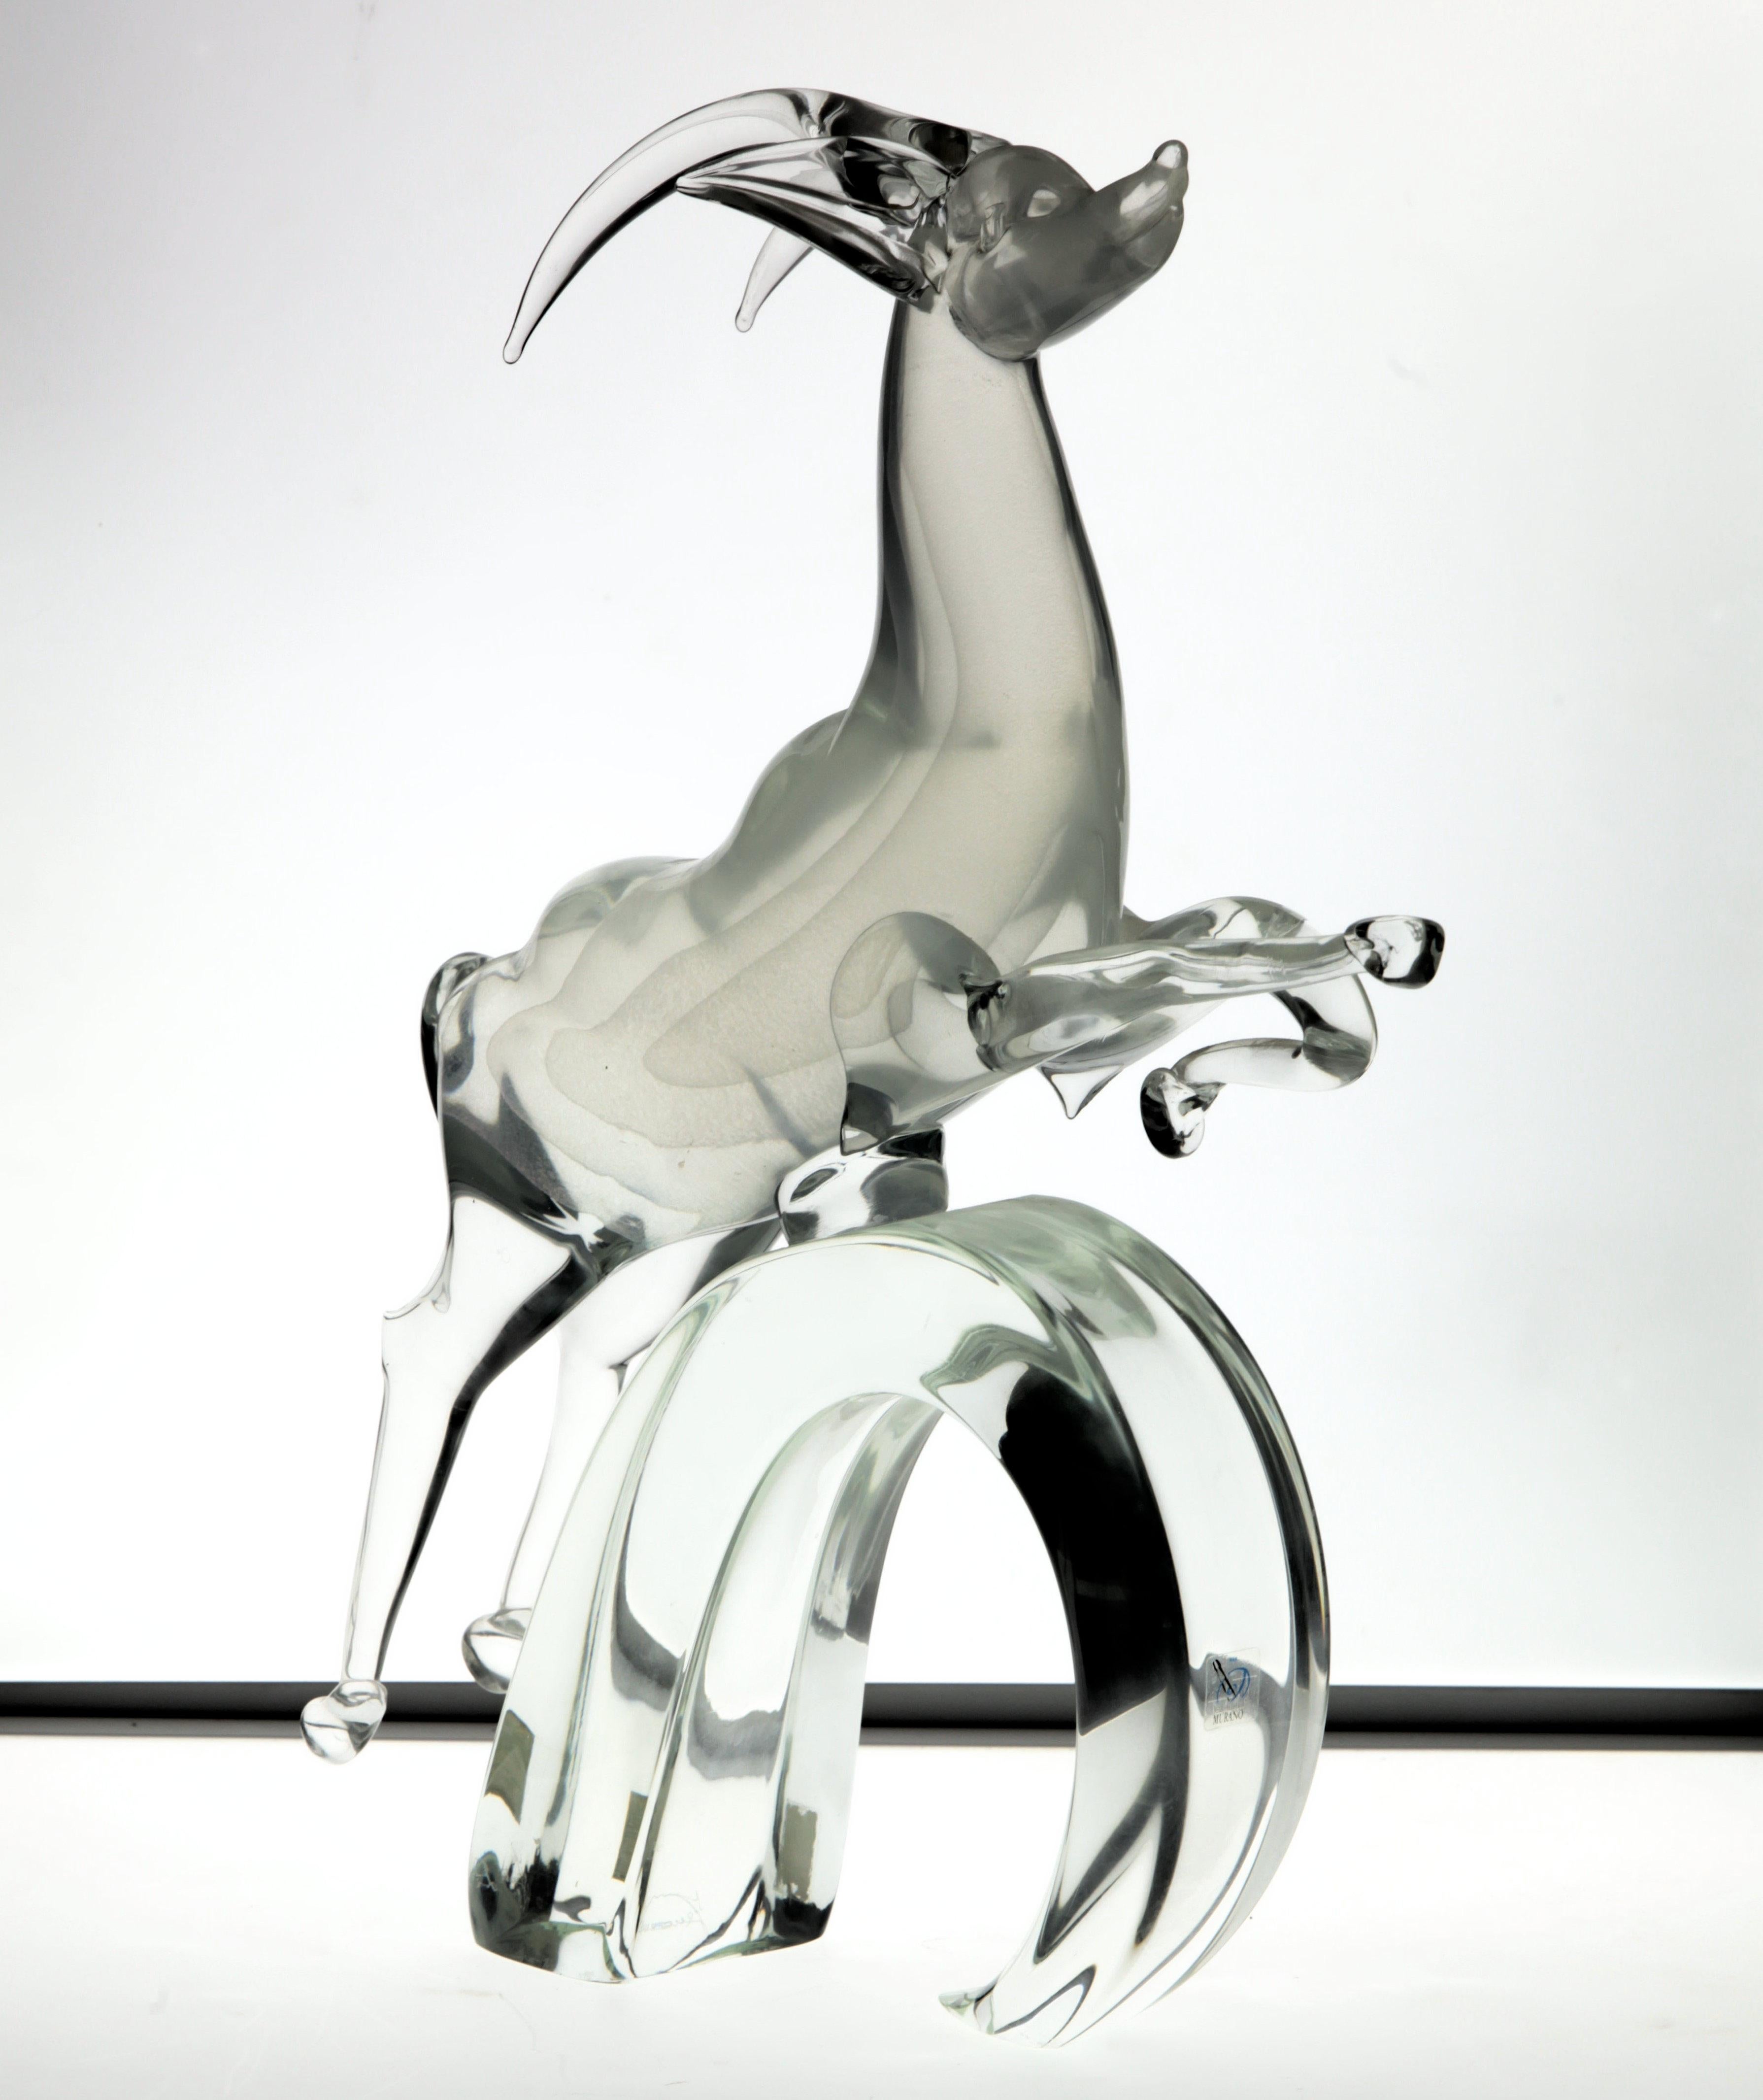 From Pauly showroom this piece is Licio Zanetti interpretation of a design from the 1920s made by Balsamo Stella.

Massiccio Murano glass, the Ibex is held on a looped glass. The body uses a technique that was used by Pino Signoretto and Livio